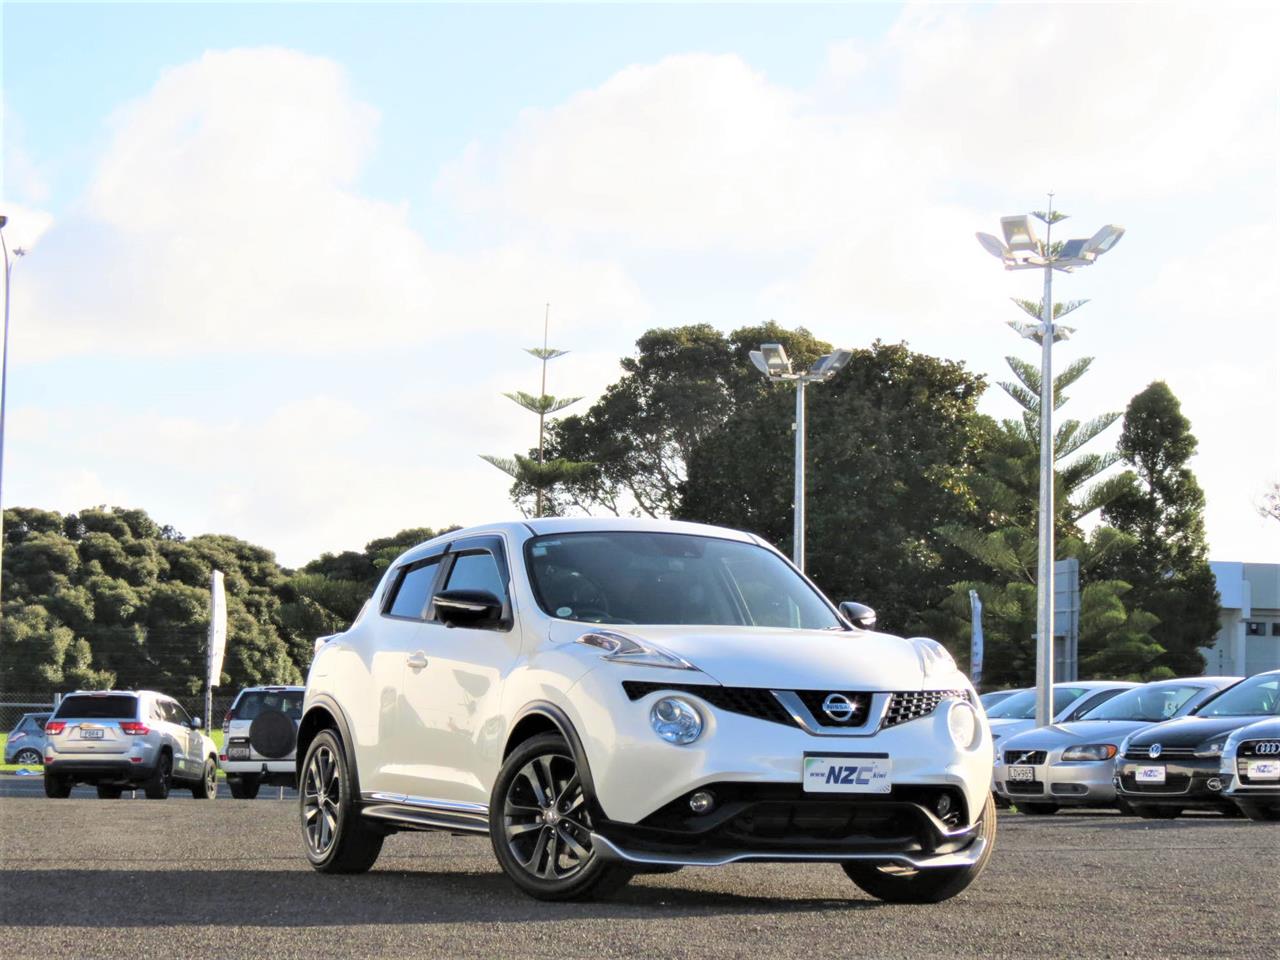 NZC 2018 Nissan JUKE just arrived to Auckland